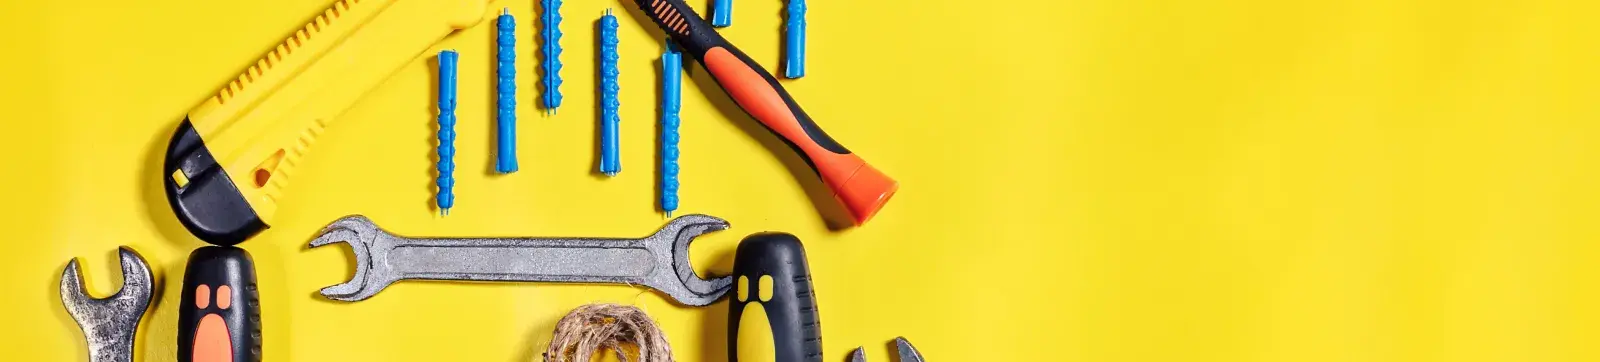 Tools hanging on yellow wall